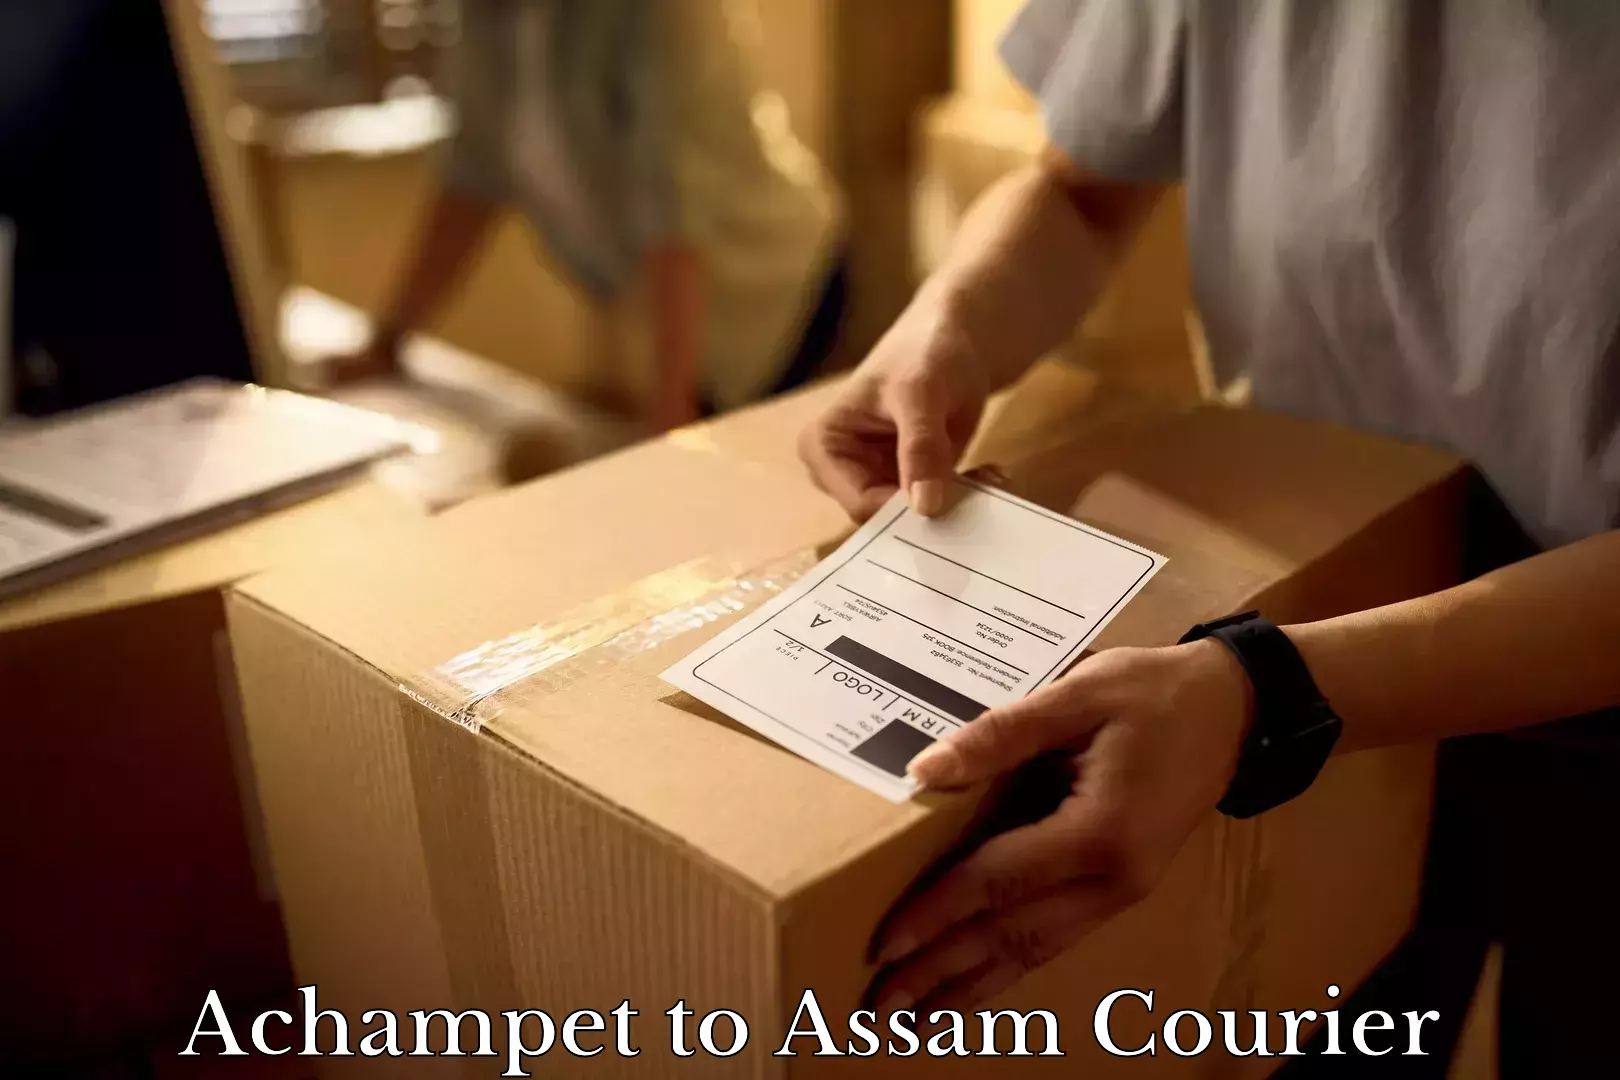 Furniture delivery service Achampet to Guwahati University